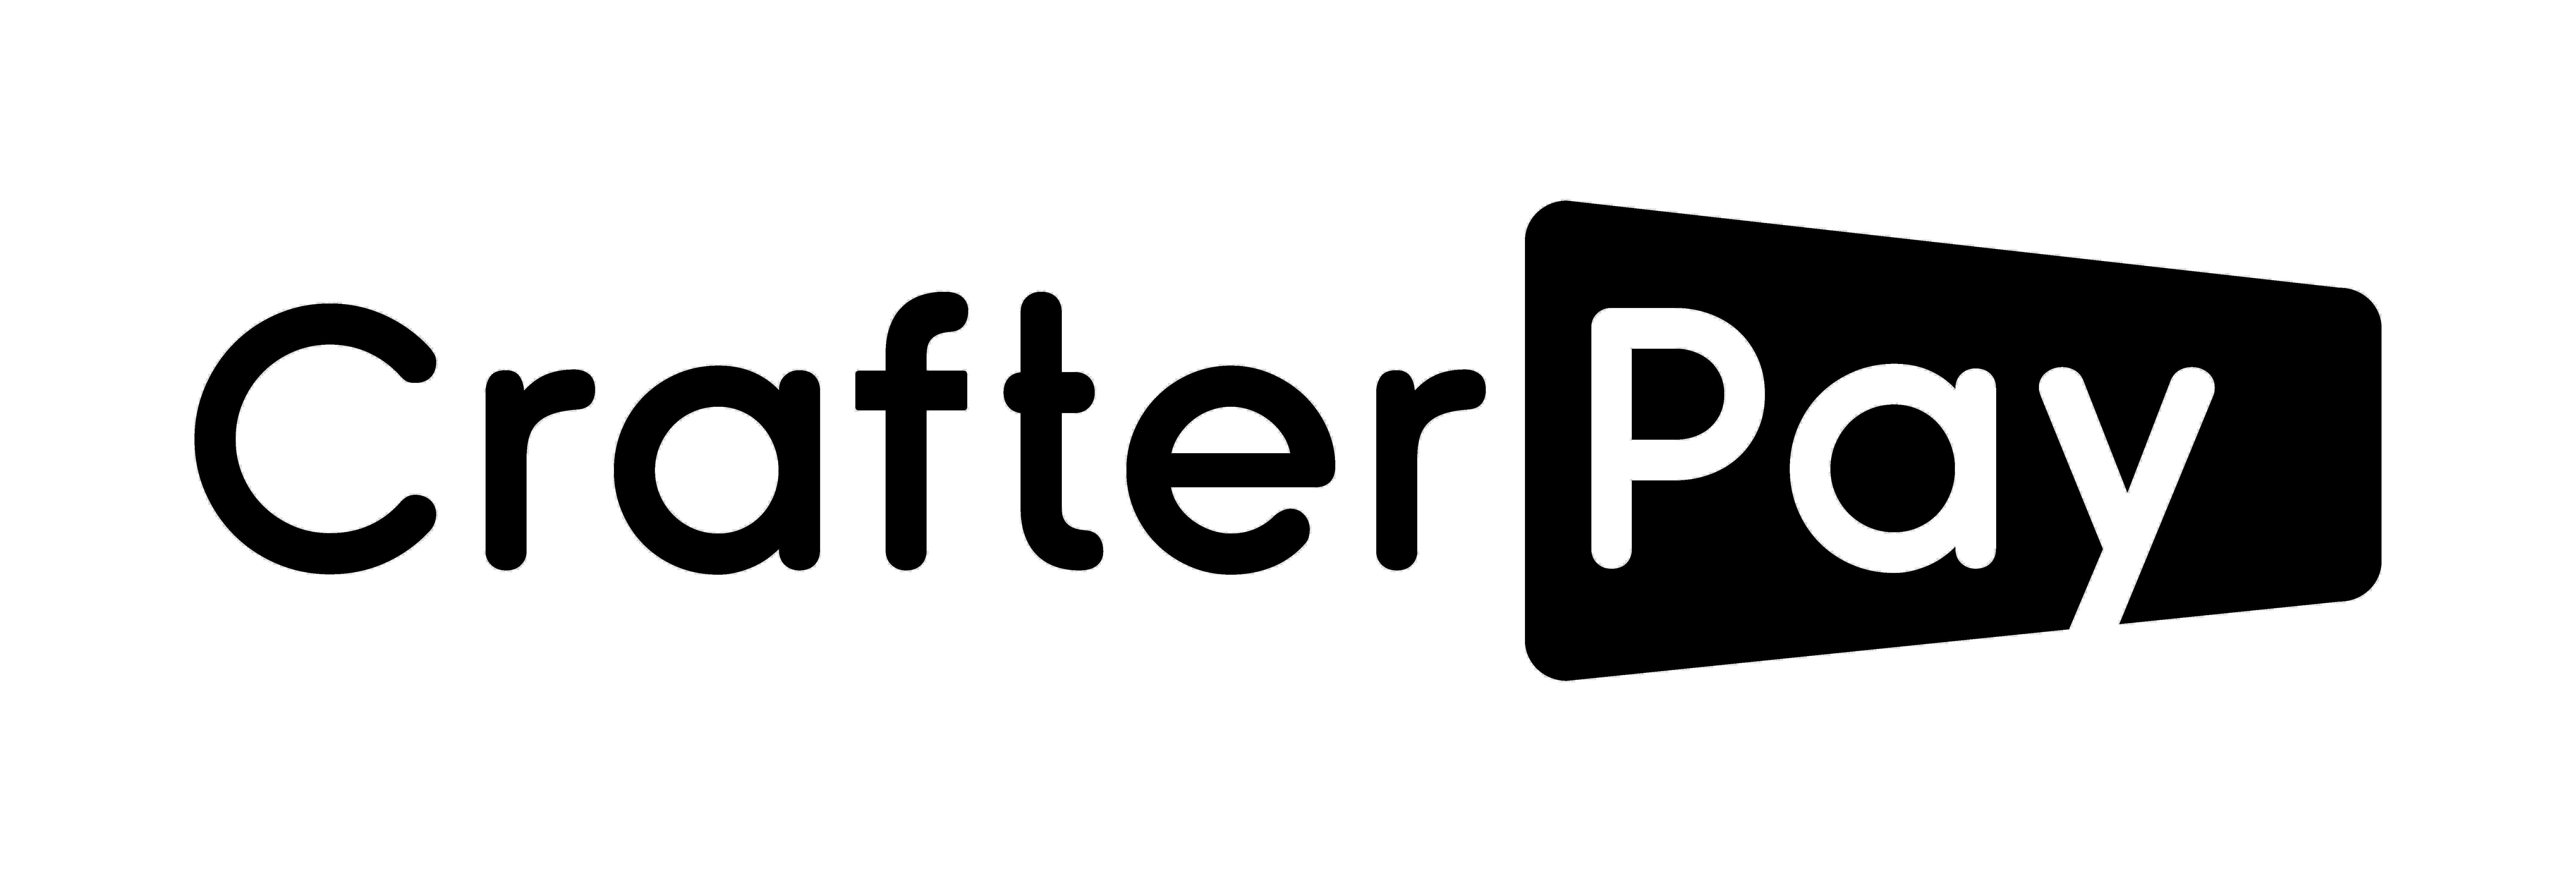 CRAFTERPAY